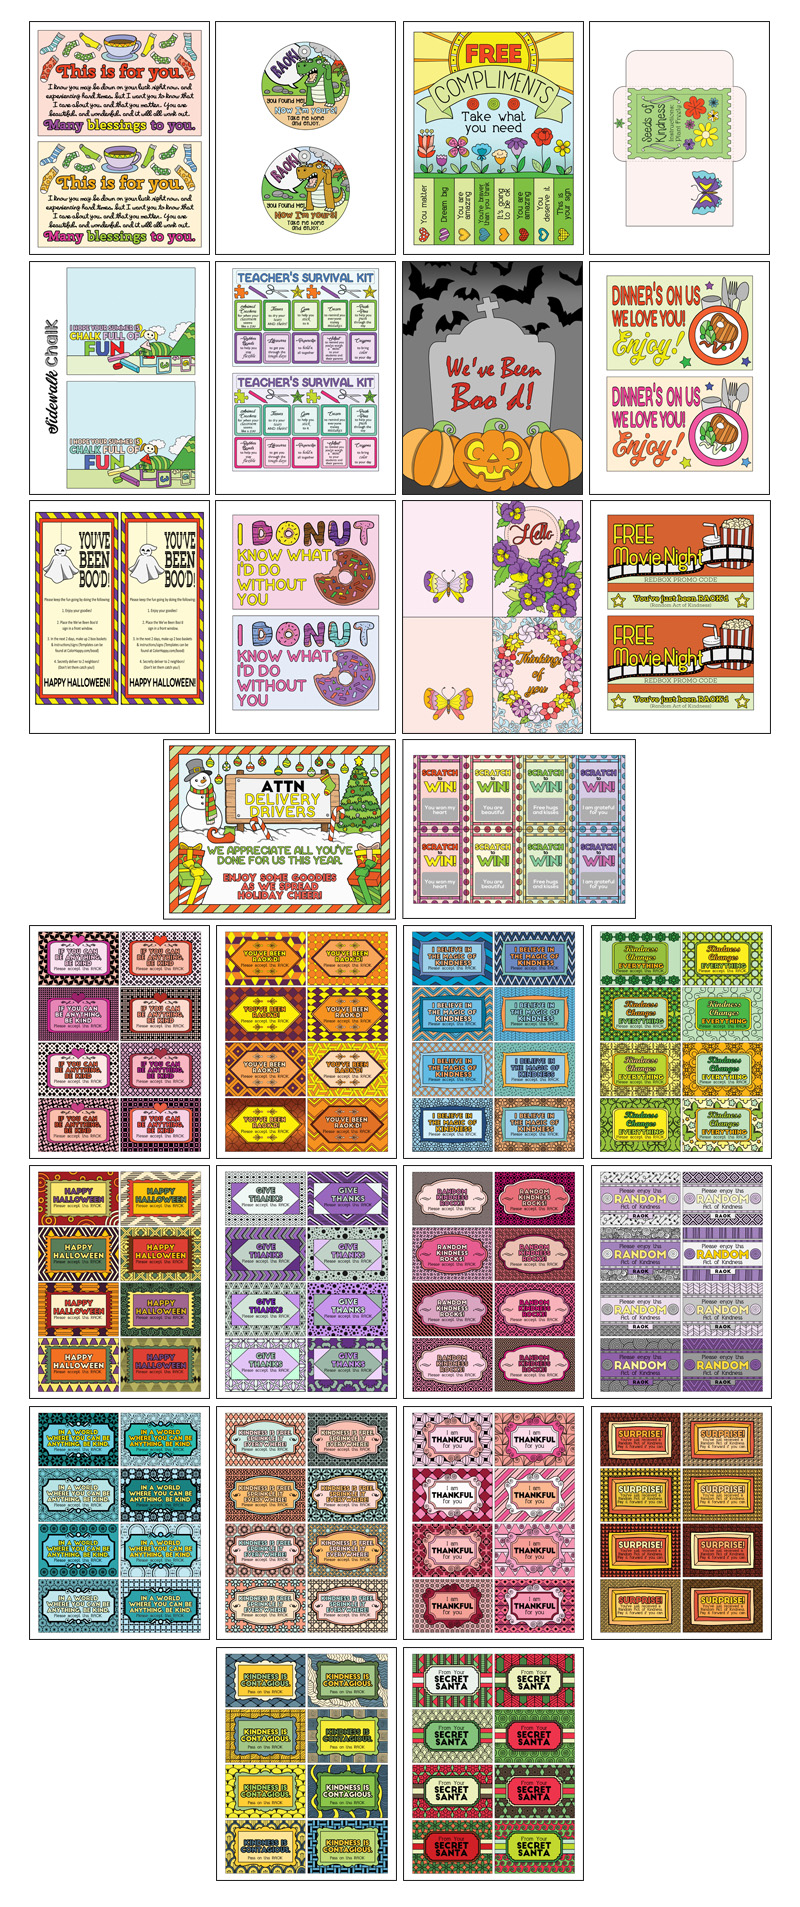 a complete image showing smaller images of all the full color pages in a package about acts of kindness crafts